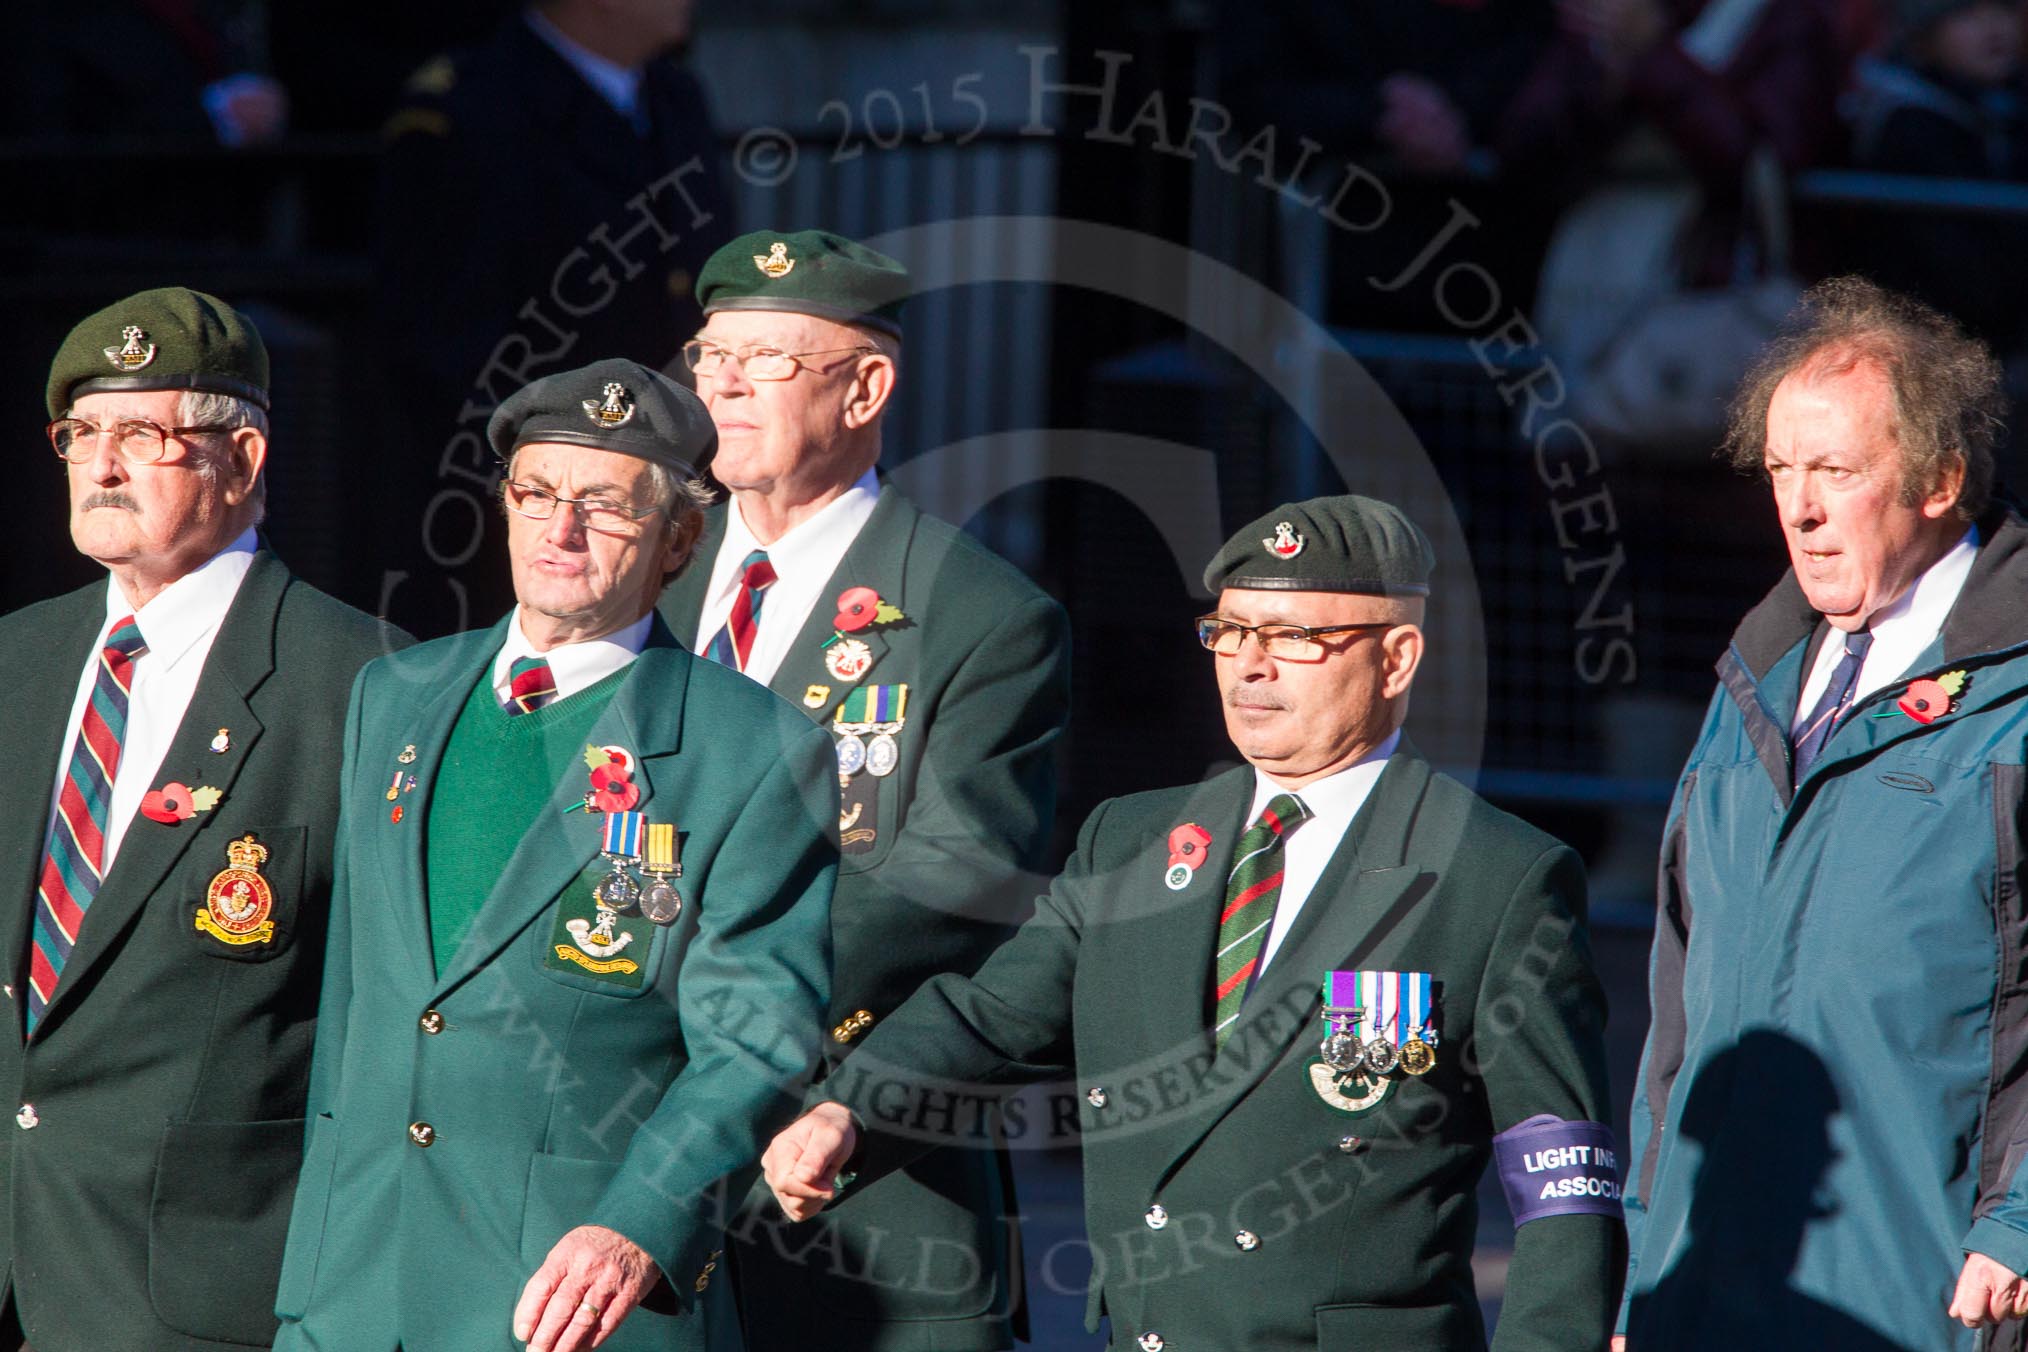 Remembrance Sunday Cenotaph March Past 2013: A14 - Light Infantry Association..
Press stand opposite the Foreign Office building, Whitehall, London SW1,
London,
Greater London,
United Kingdom,
on 10 November 2013 at 11:56, image #1102